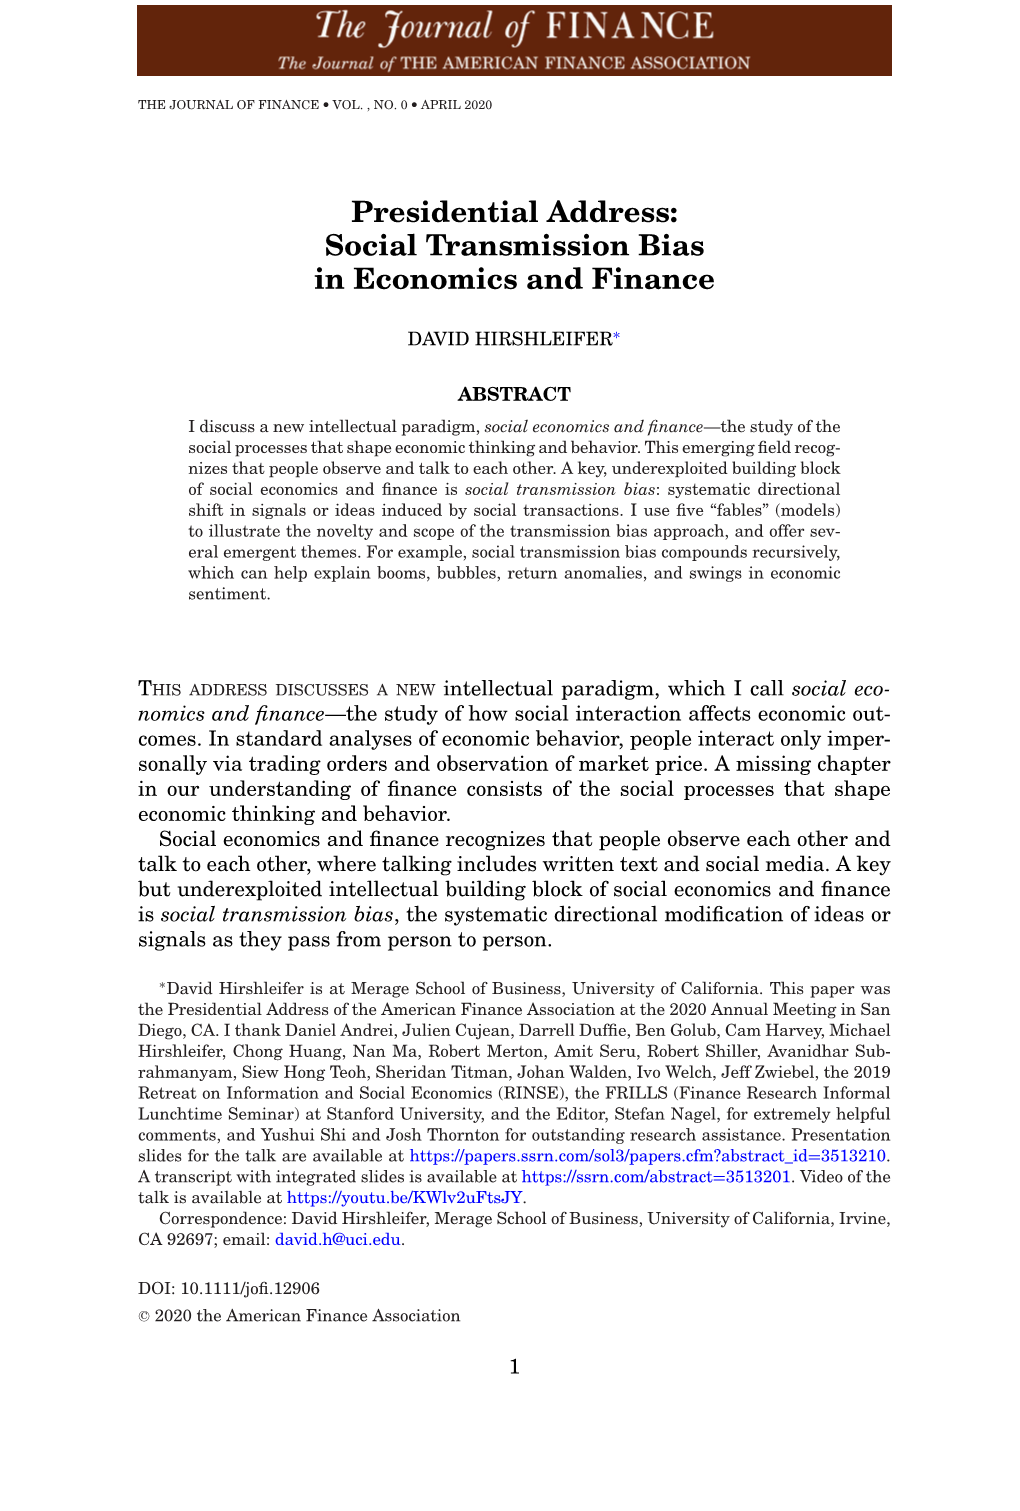 Social Transmission Bias in Economics and Finance